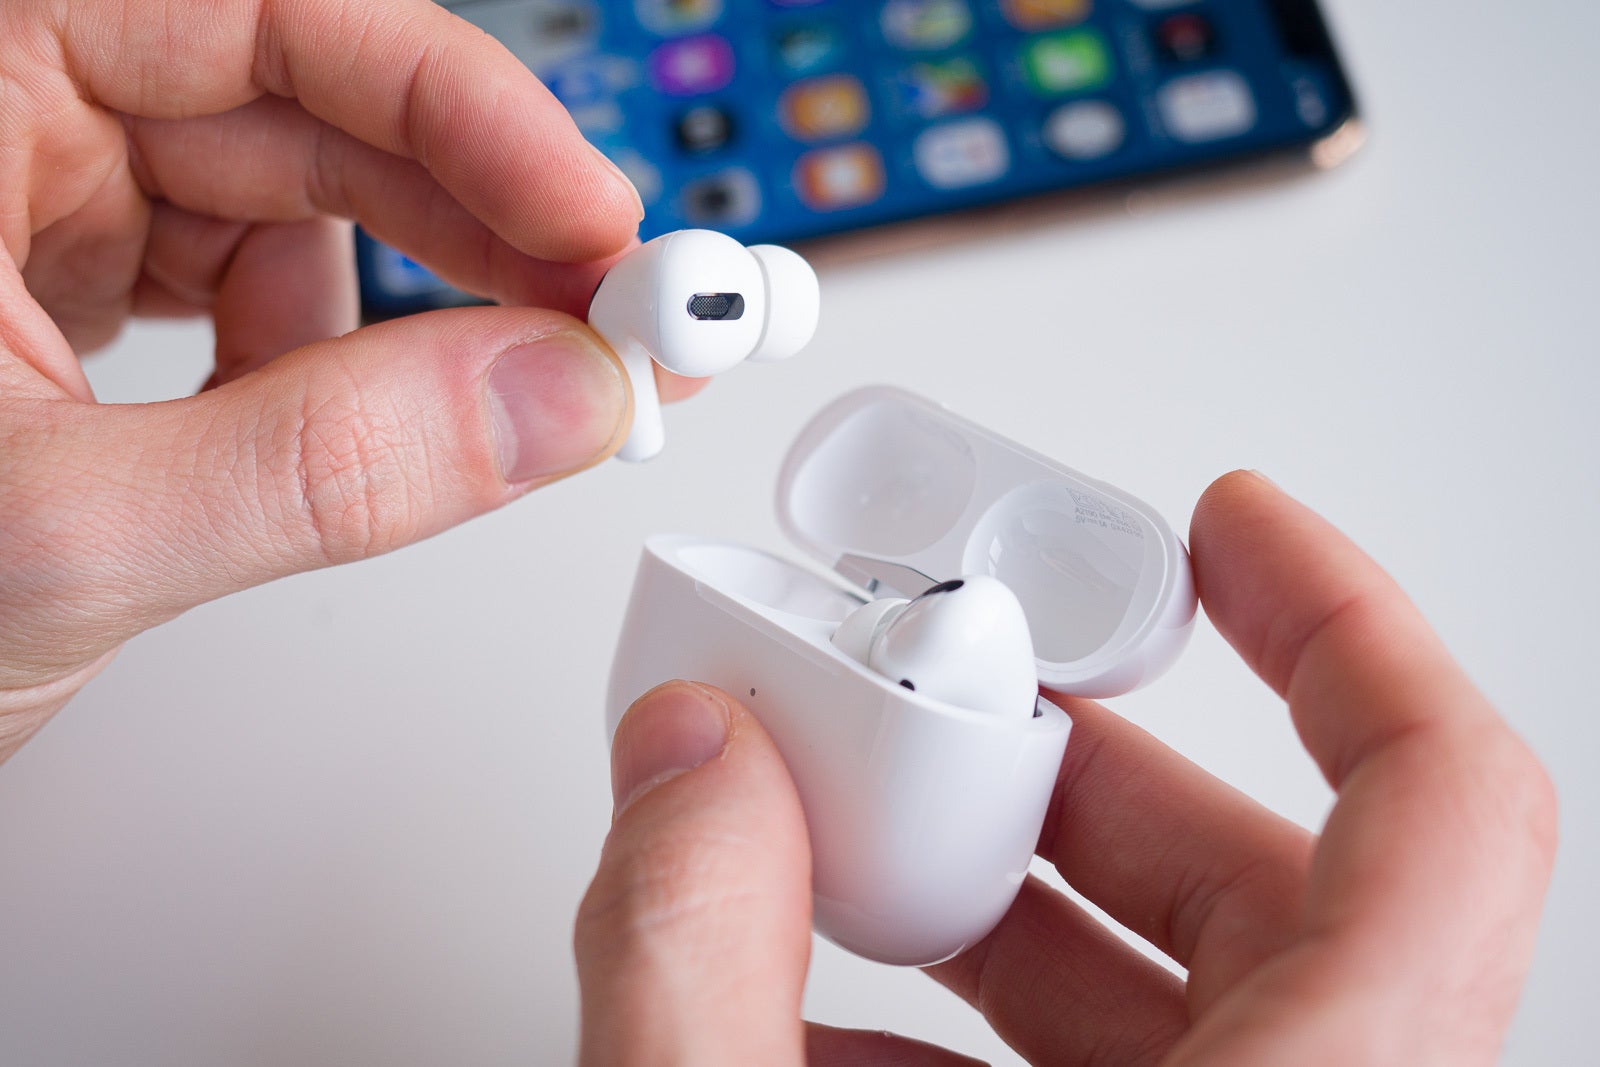 AirPods Pro - Amazon is selling two of Apple’s AirPods models for their best price yet in 2022